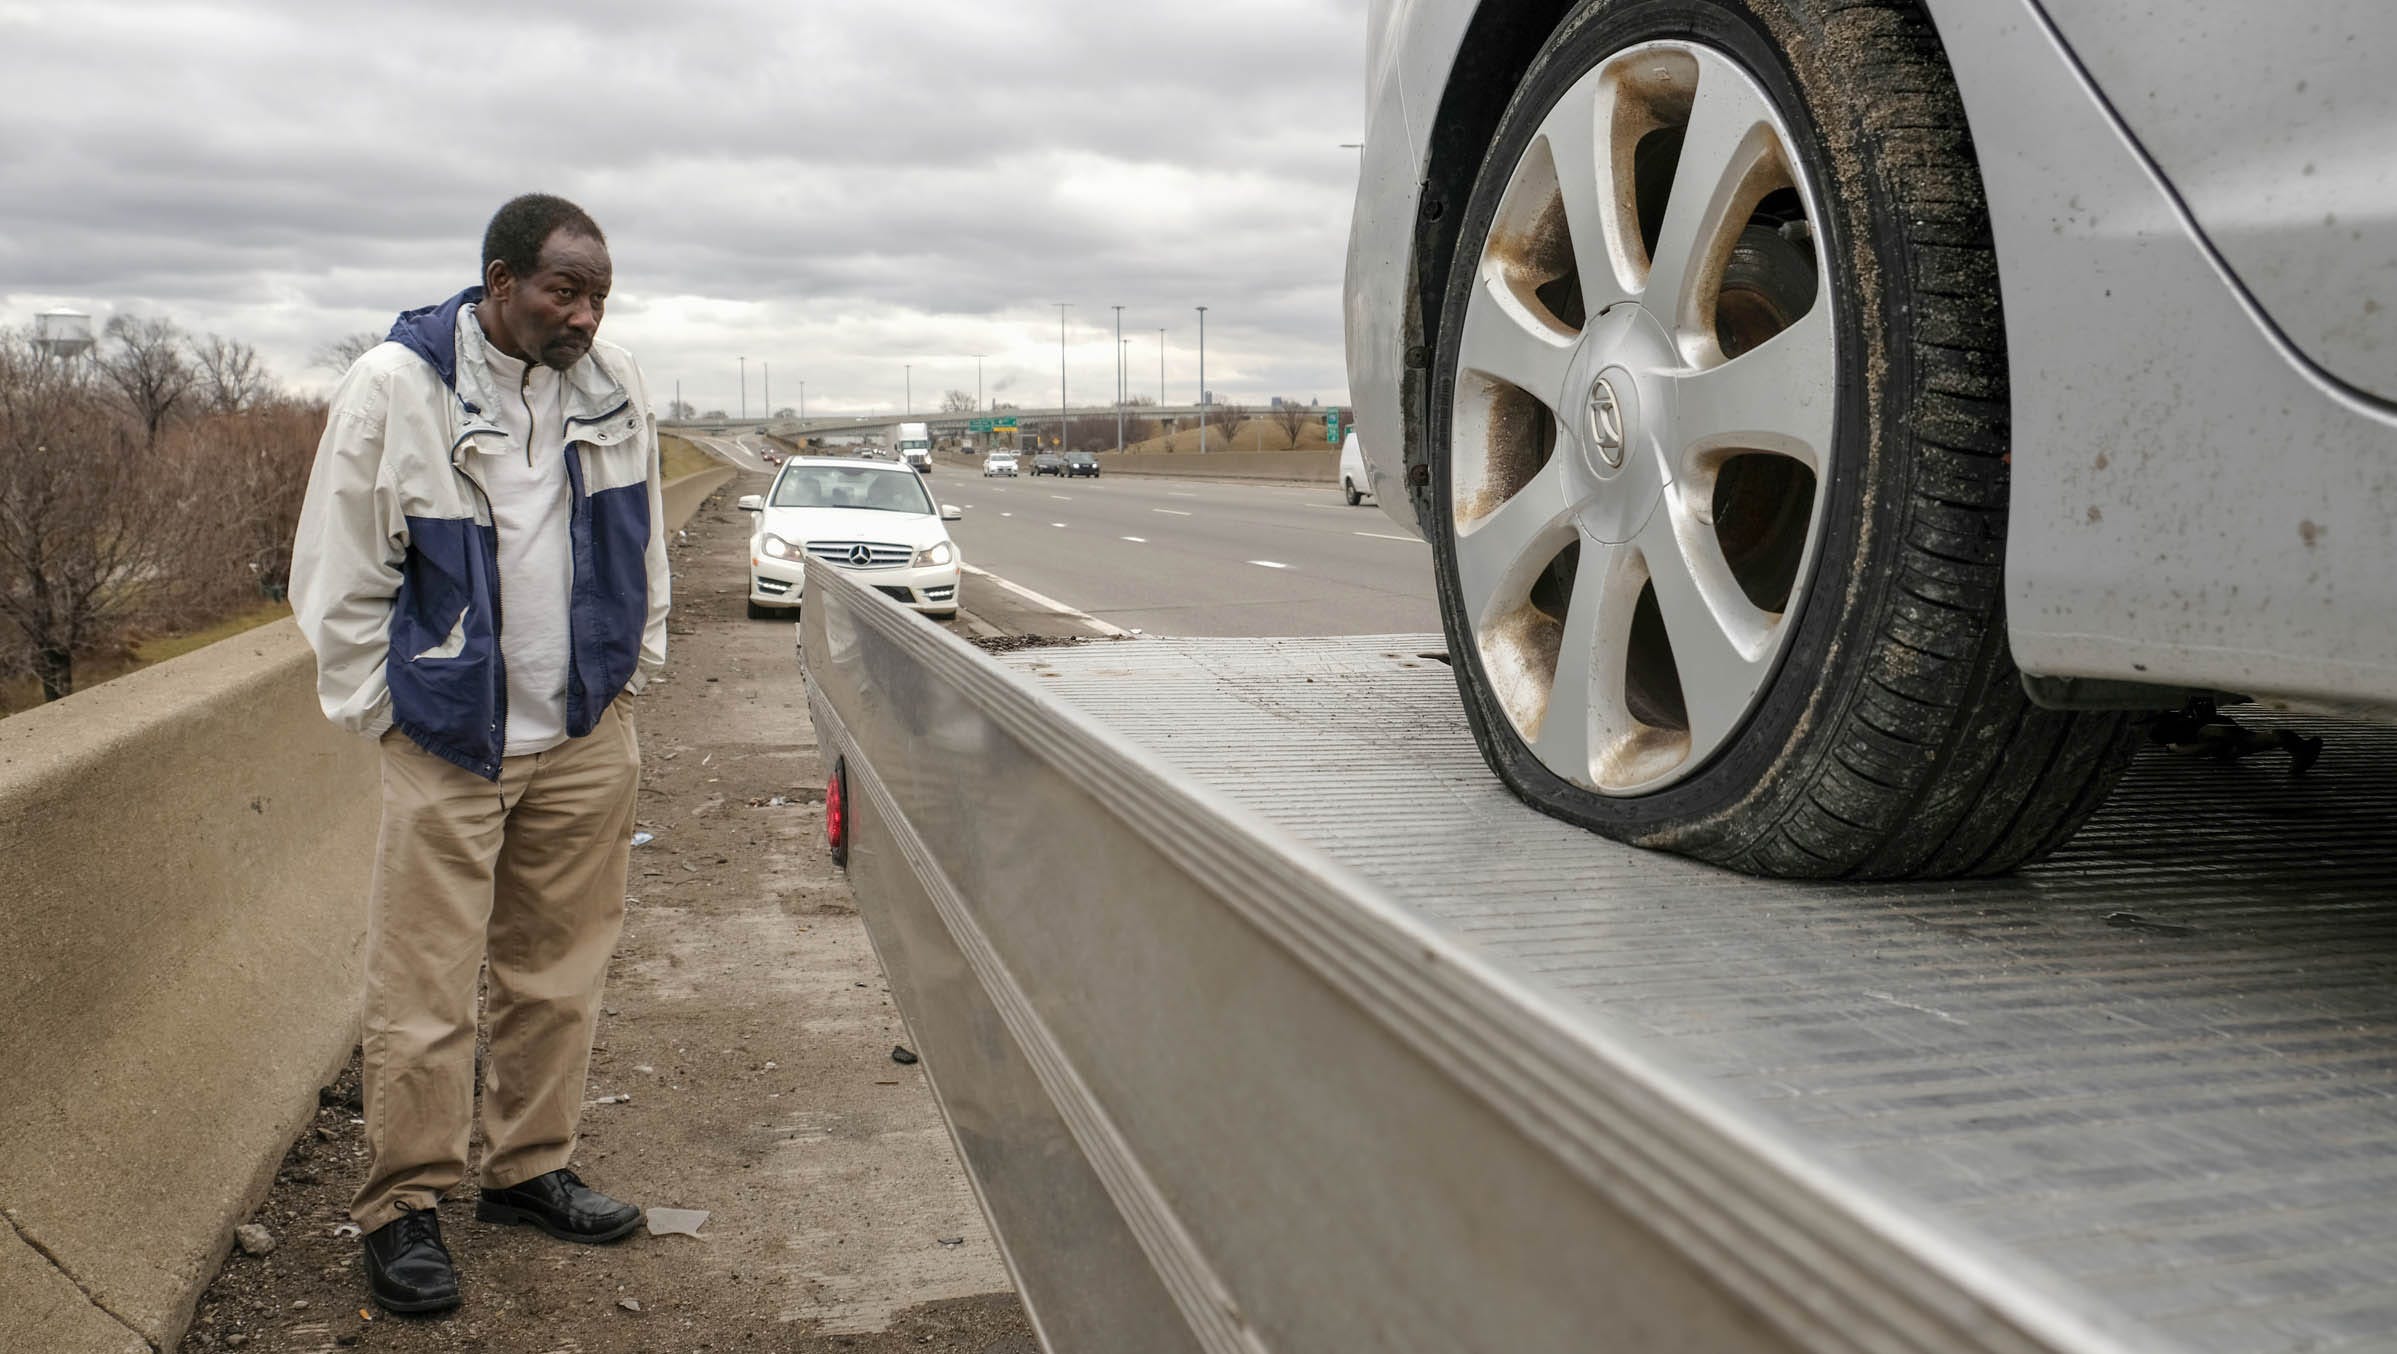 Pothole damage? Choosing the right tire and wheel can protect you